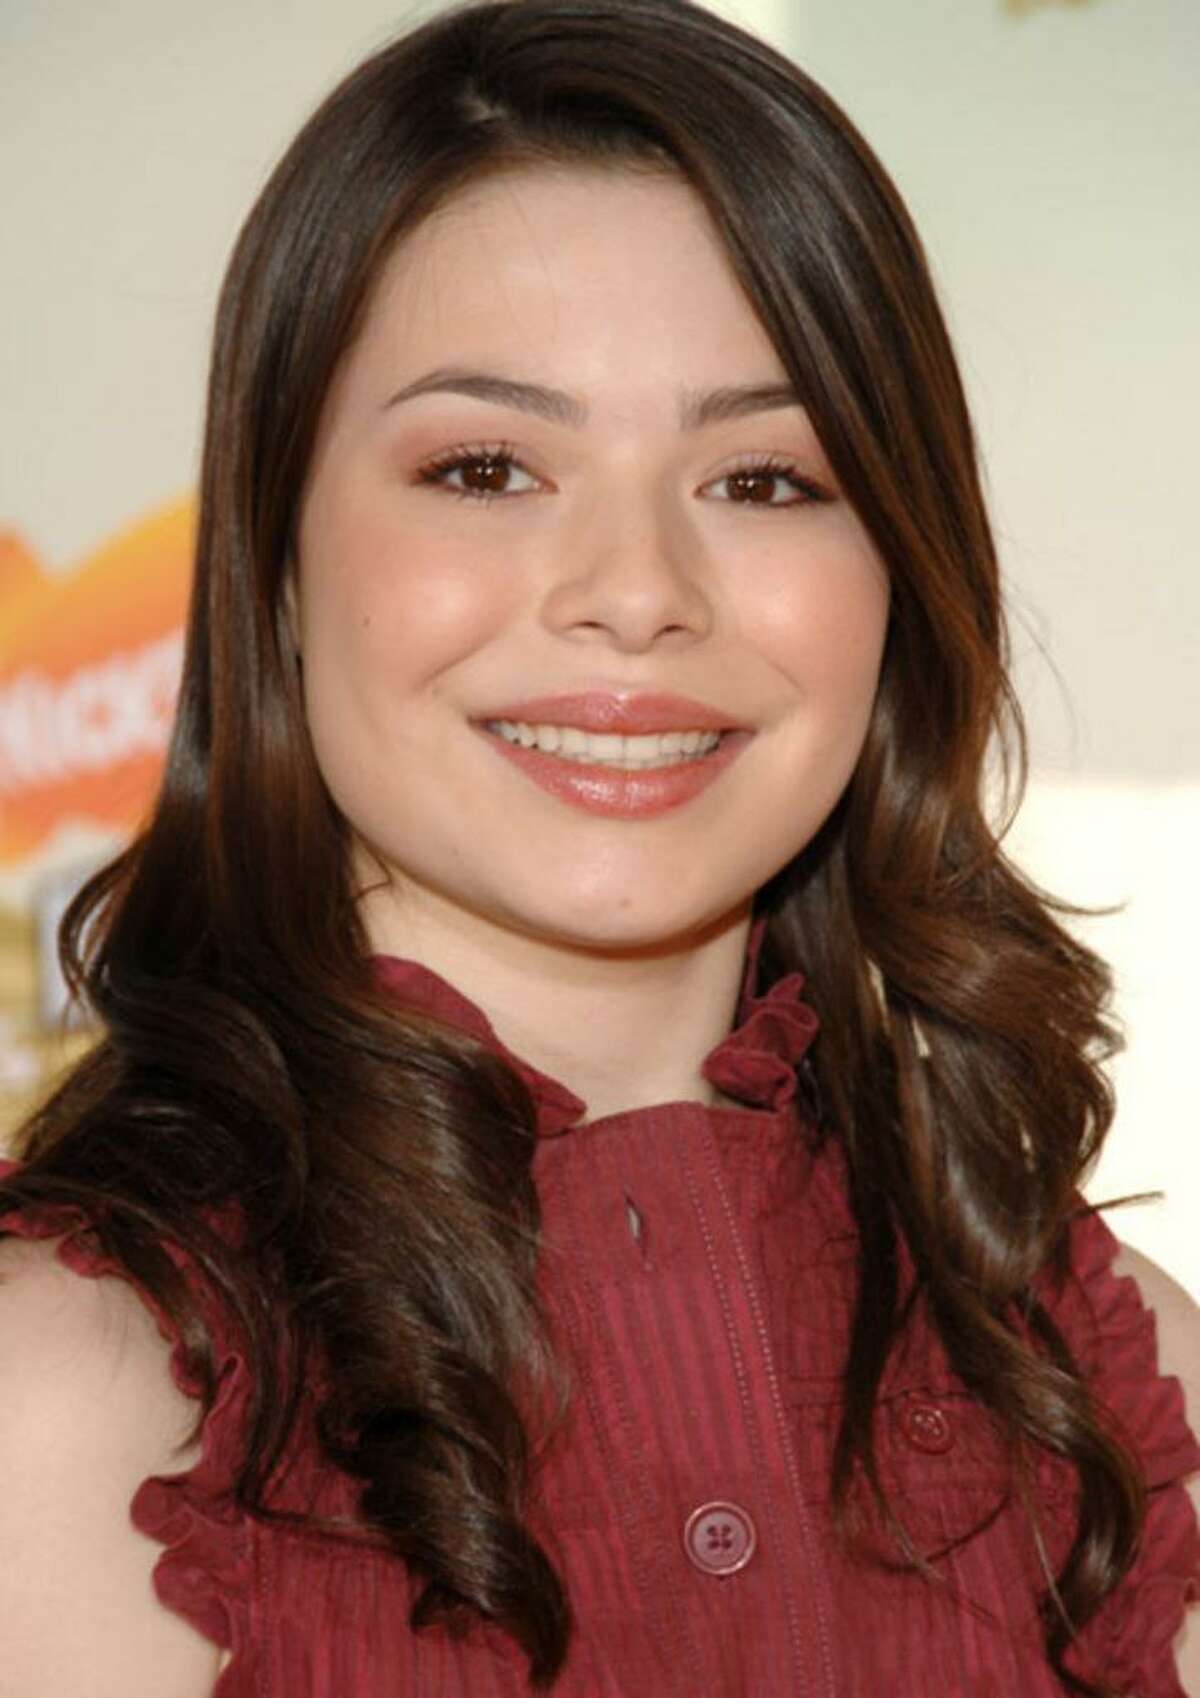 iCarly's Miranda Cosgrove to perform in Connecticut